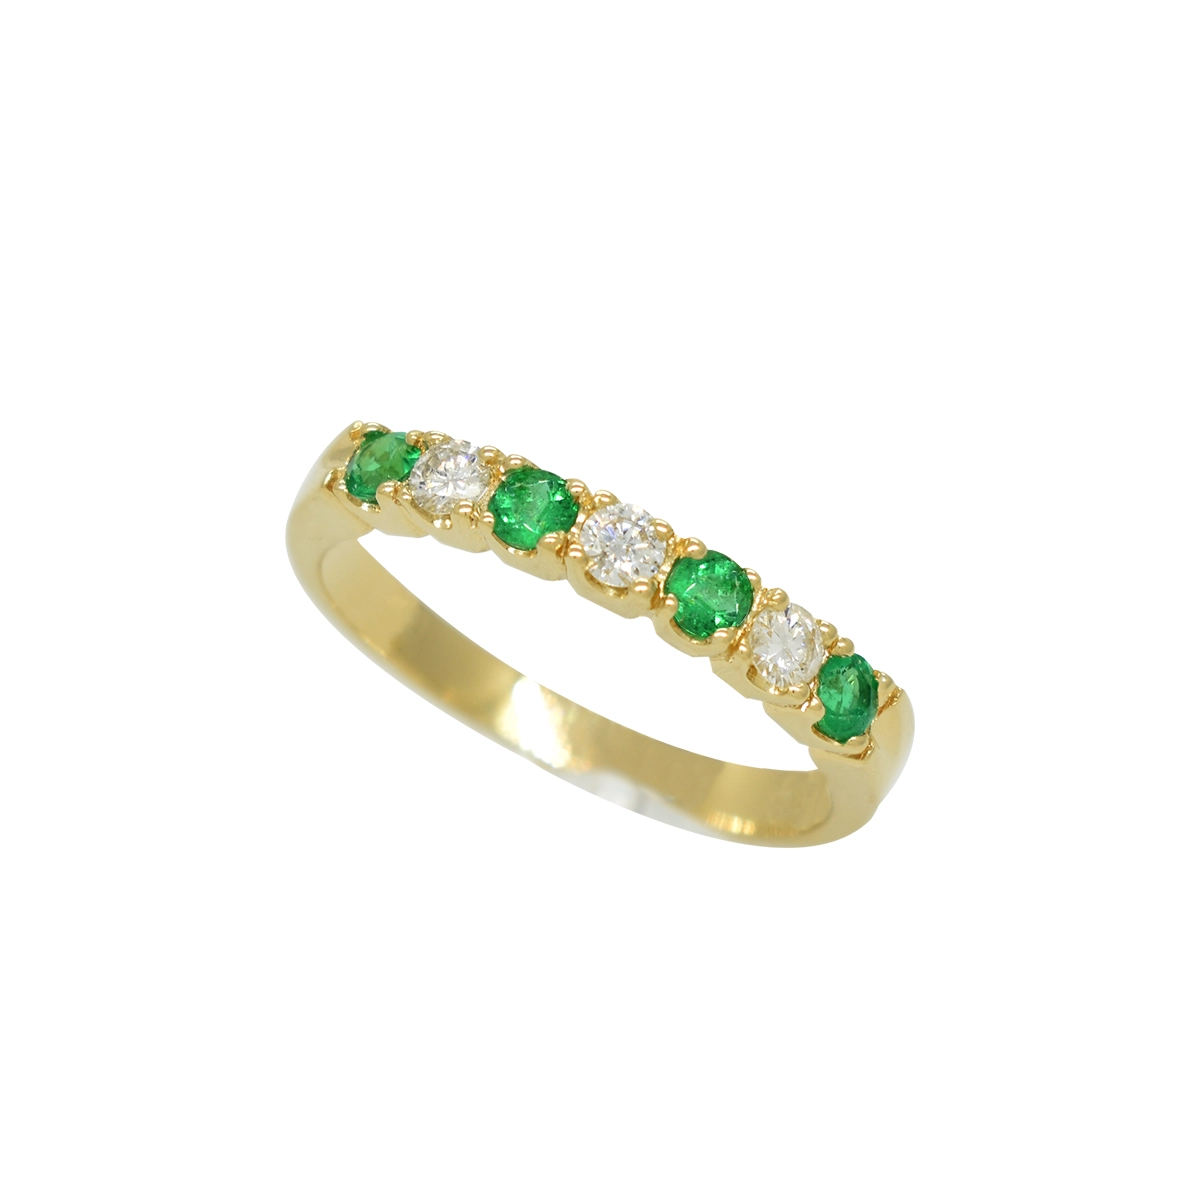 Green emerald wedding band ring set with white diamonds in half eternity band in solid 18K yellow gold